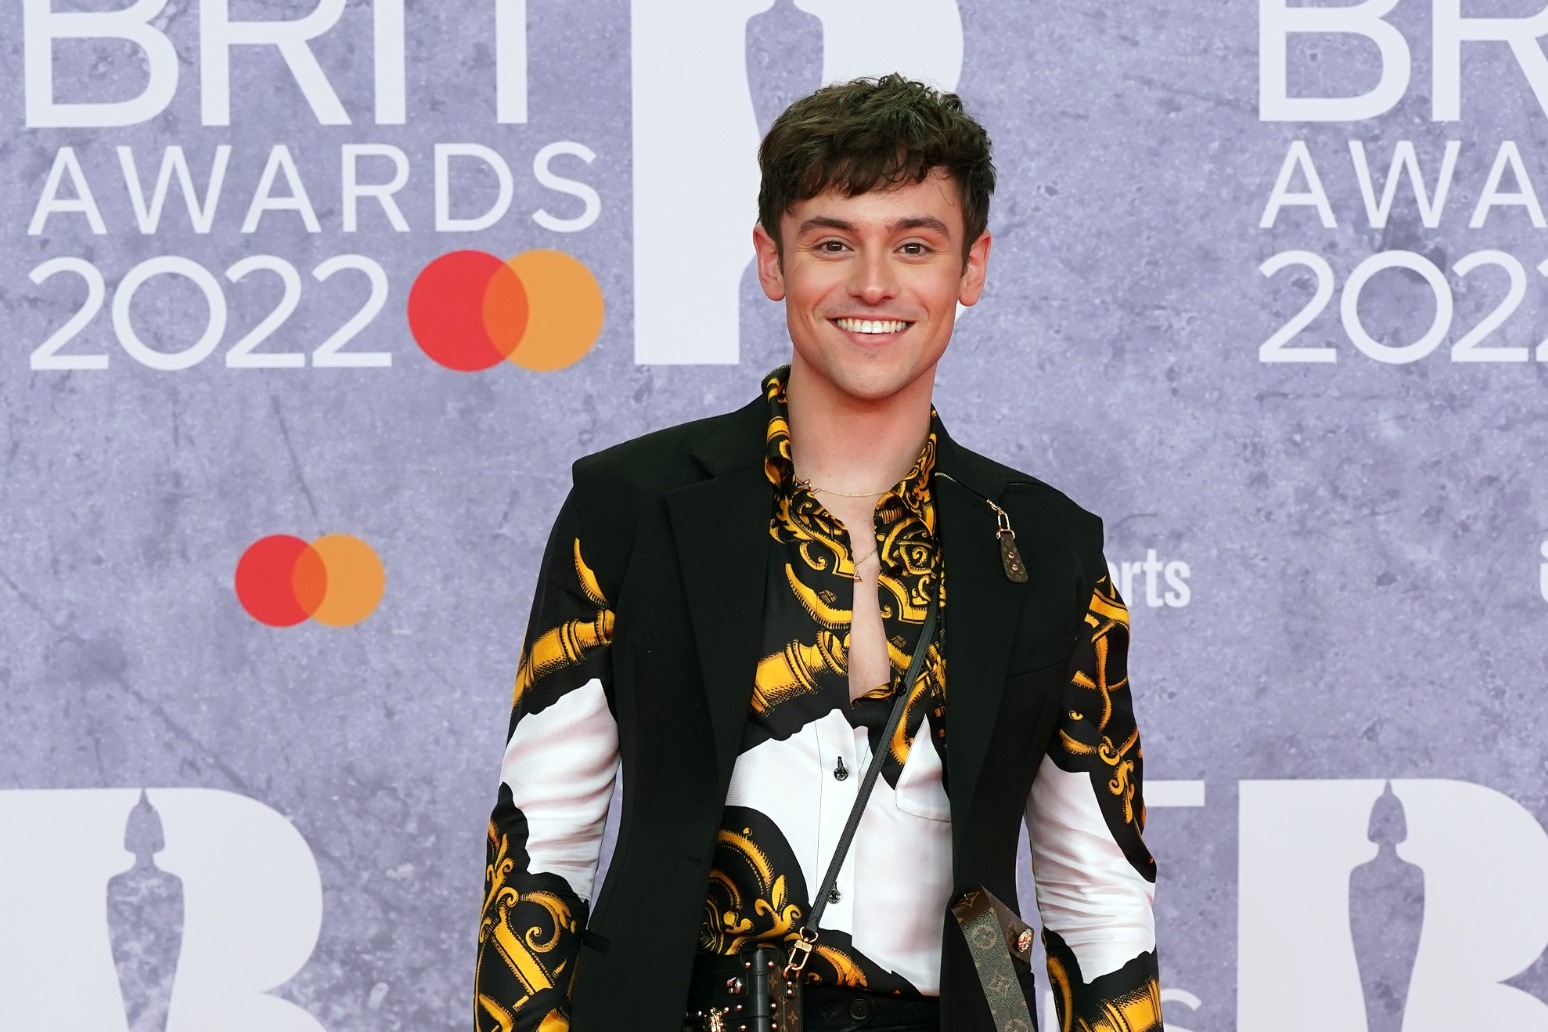 Tom Daley says becoming a parent unlocked a whole different level of his heart